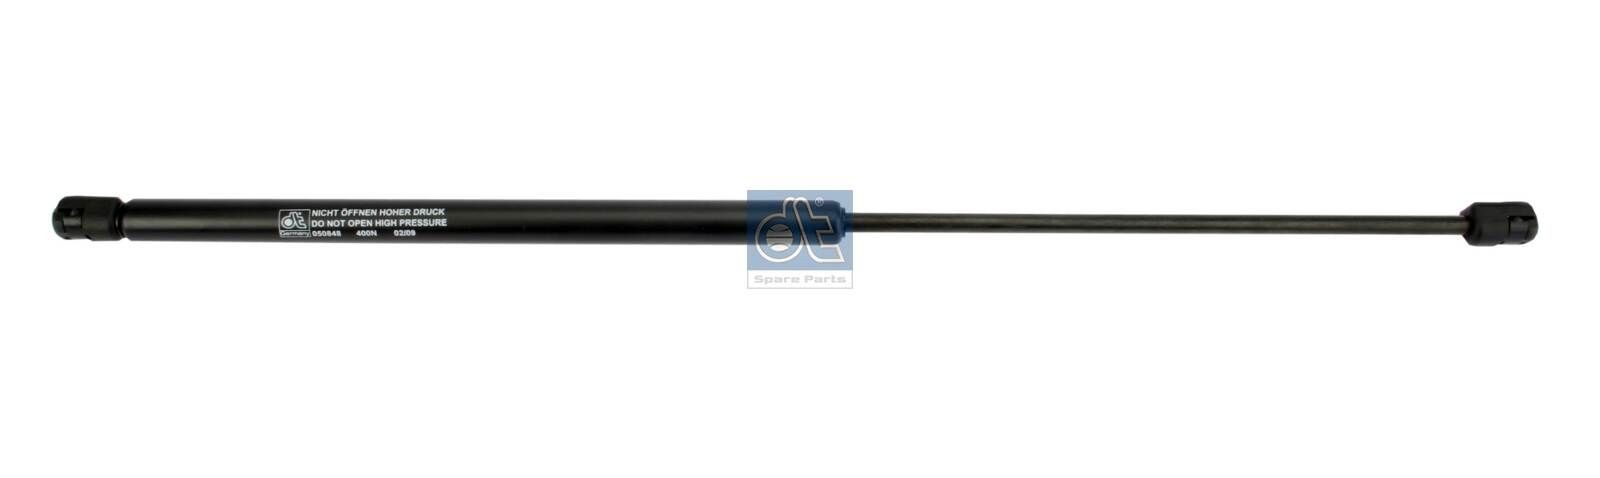 436916 DT Spare Parts 400N, 585 mm Gas Spring 1.23258 buy